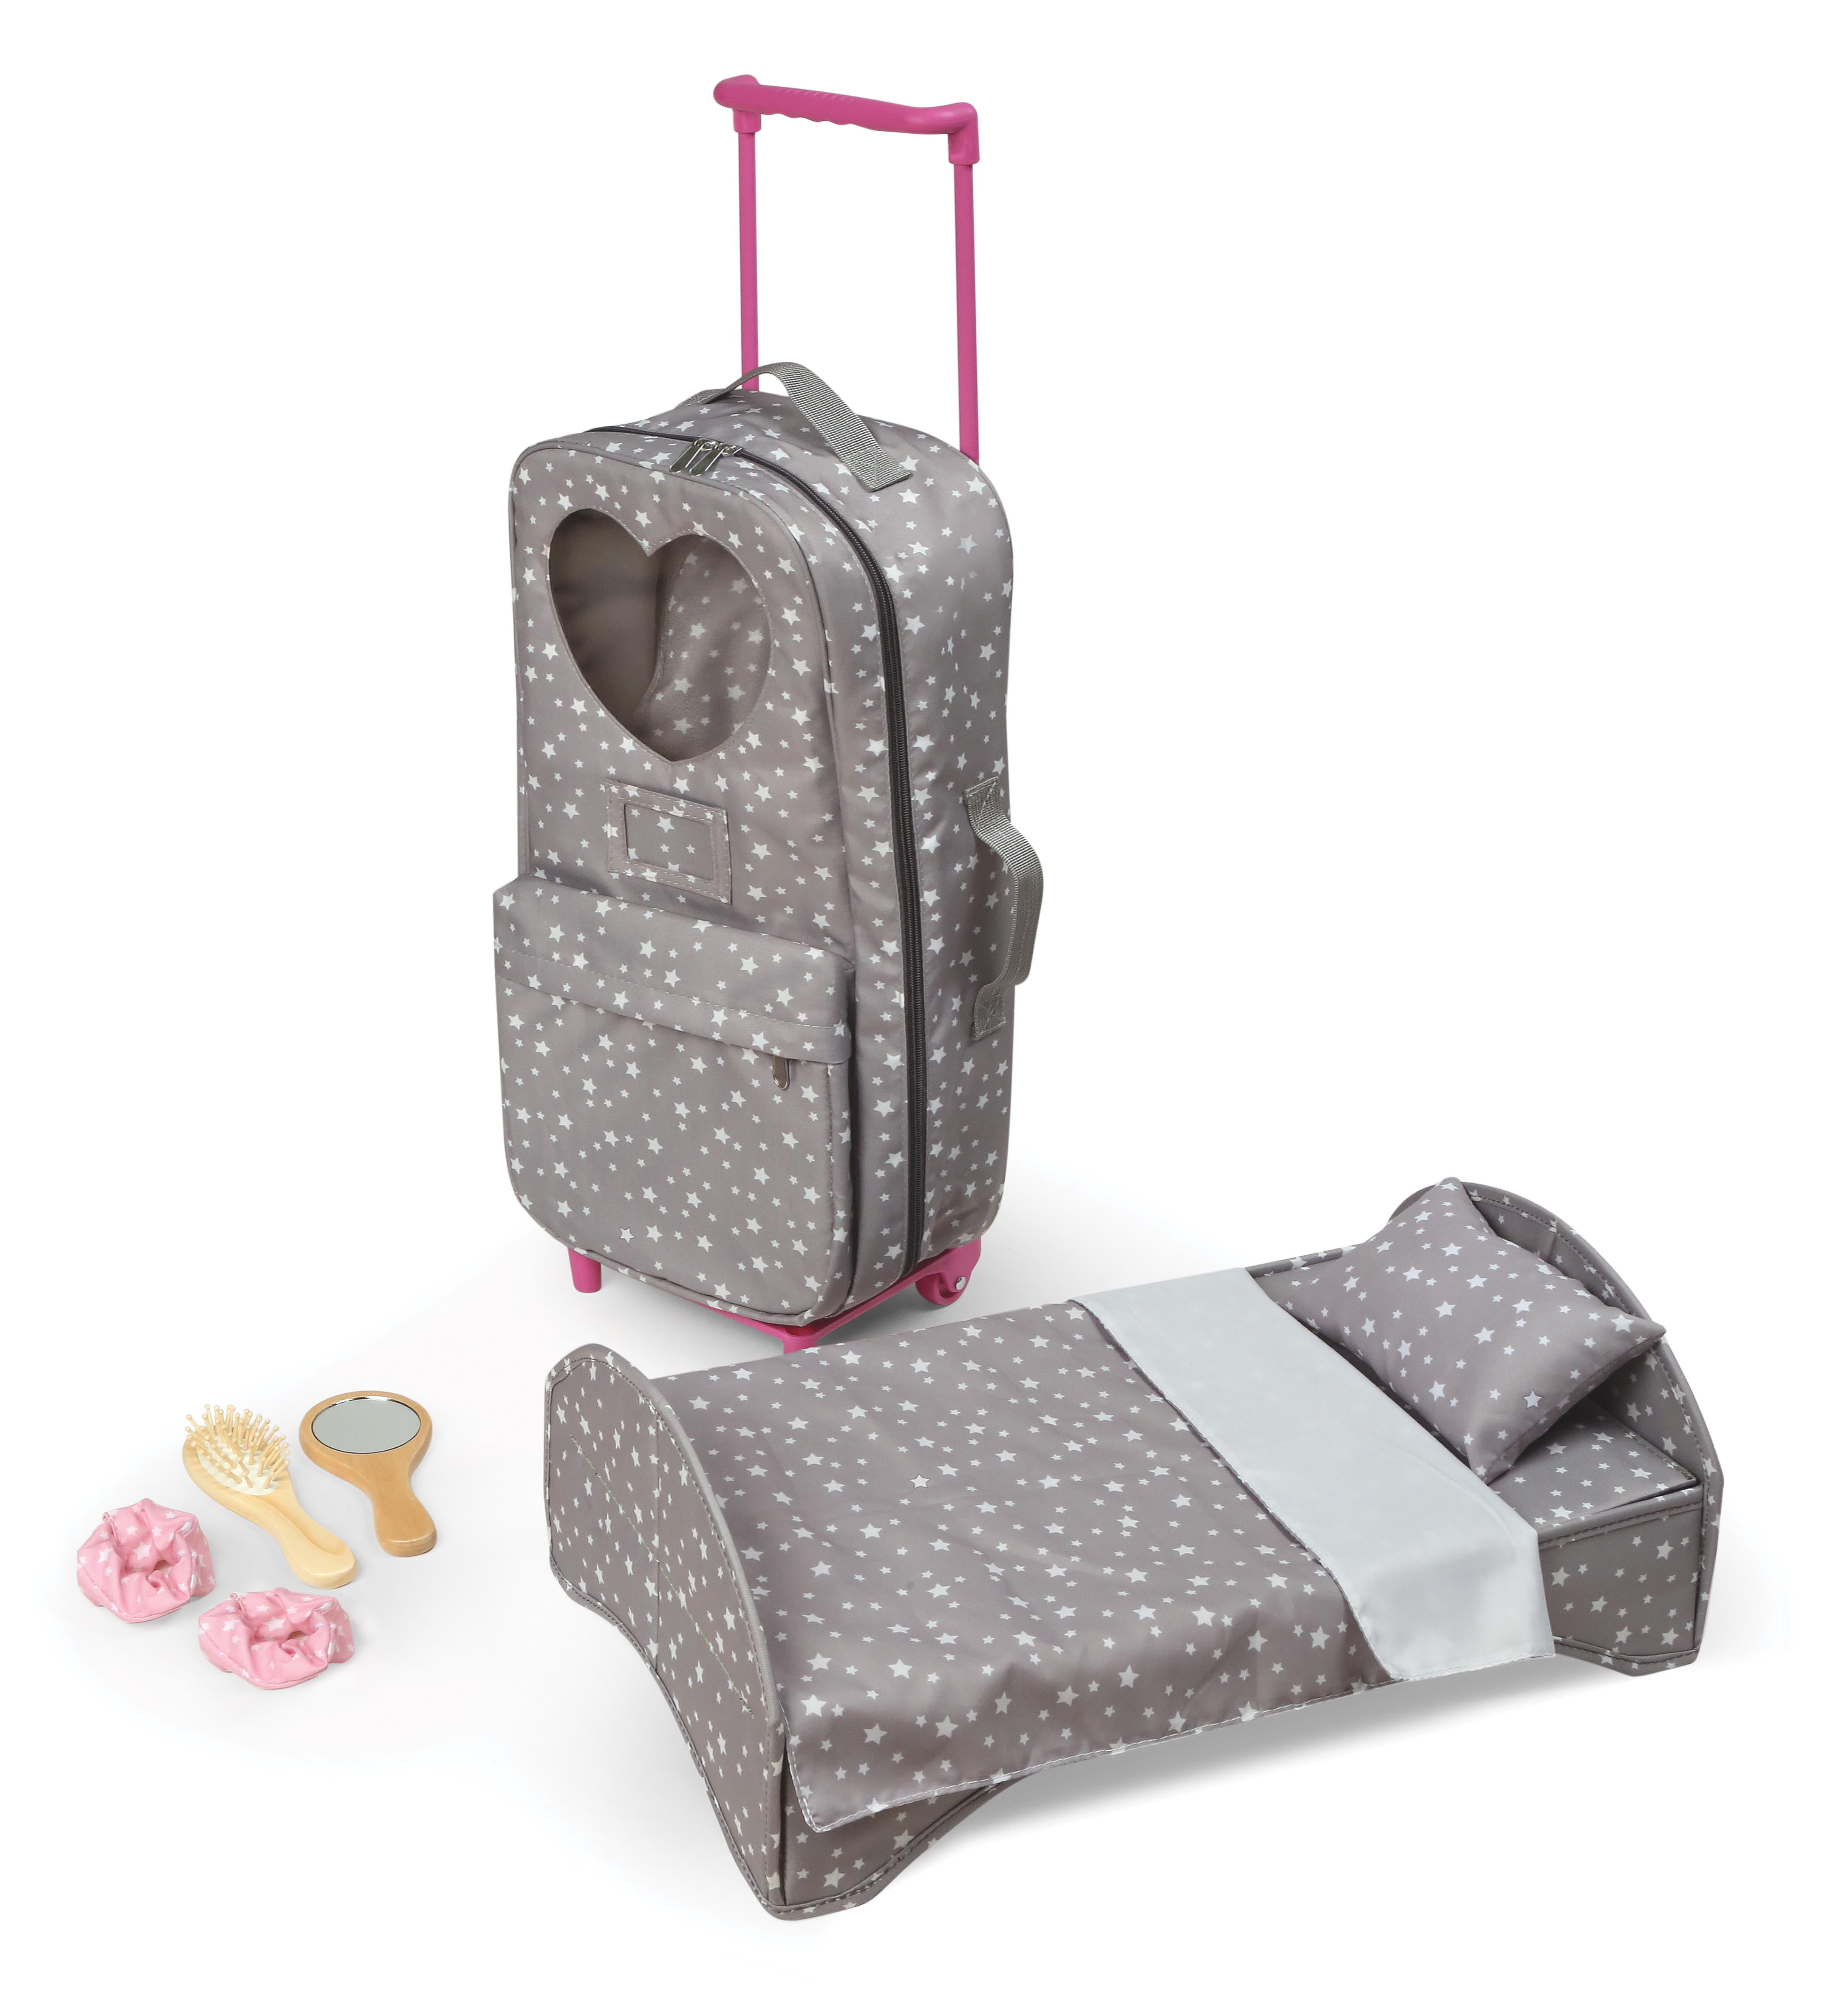 Outdoor Carrying Doll Backpack Doll Bag Accessories for 18inch Dolls